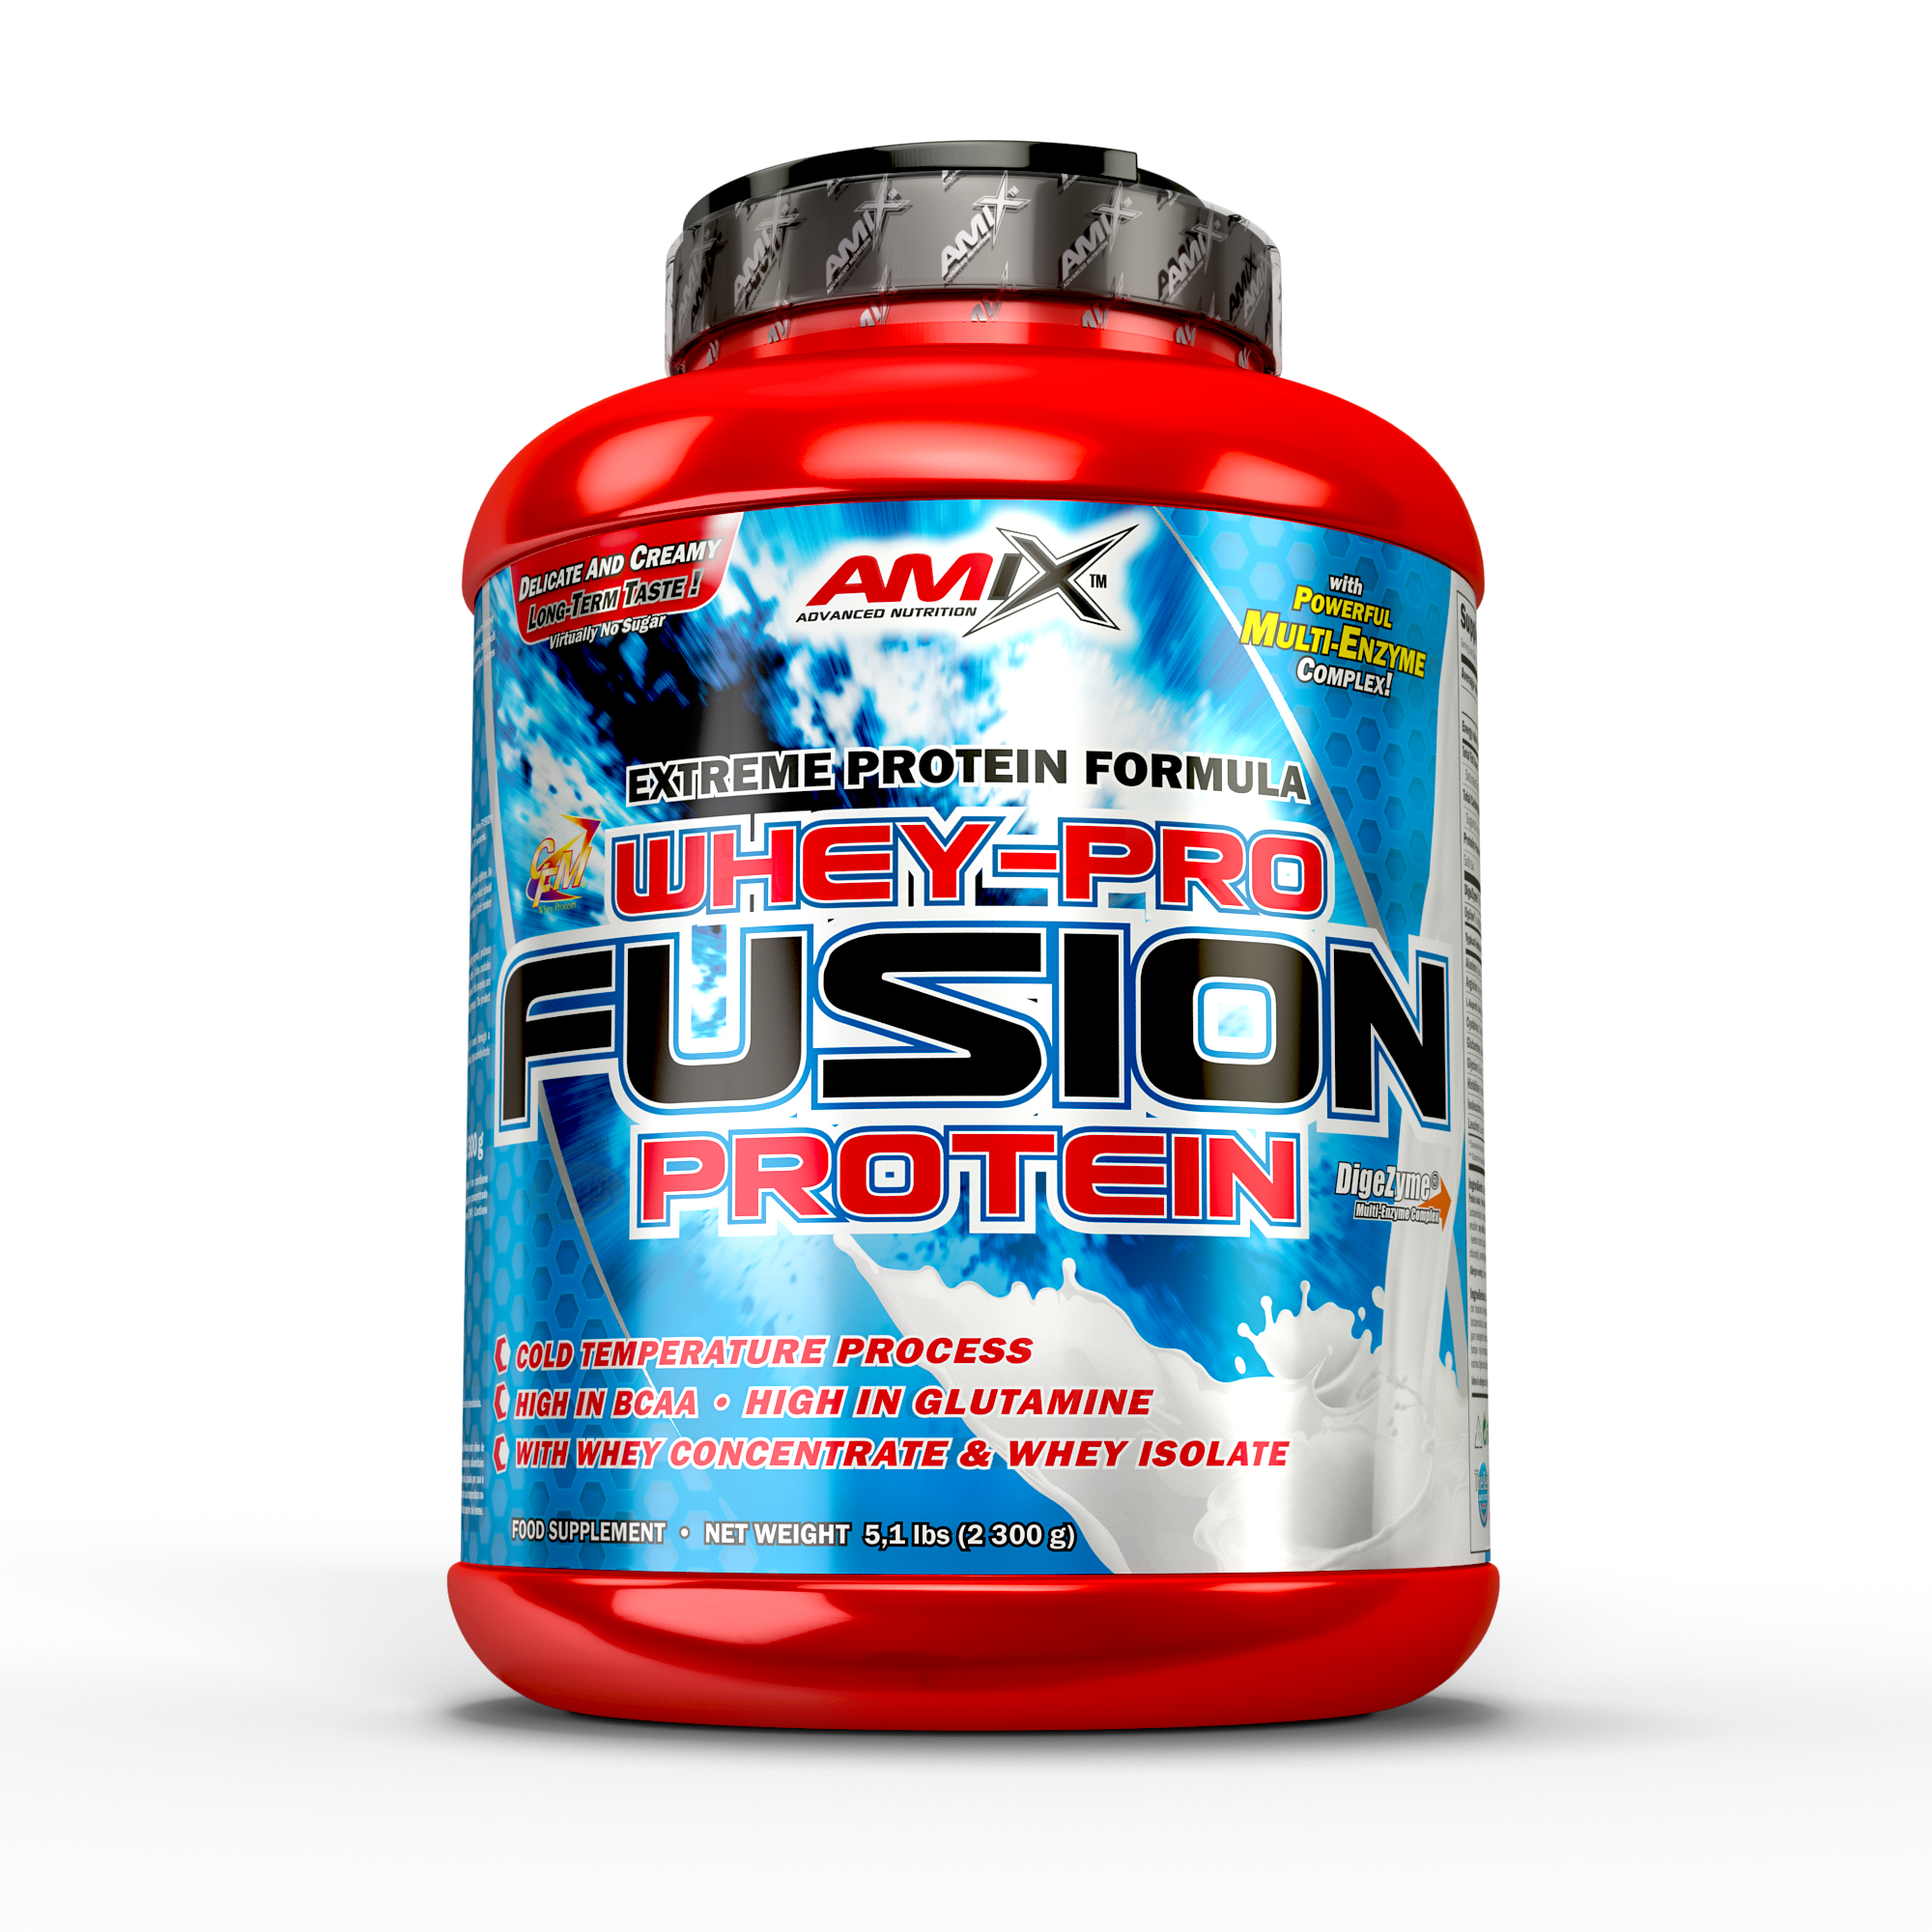 WHEY PRO FUSION PROTEIN 2.3gr